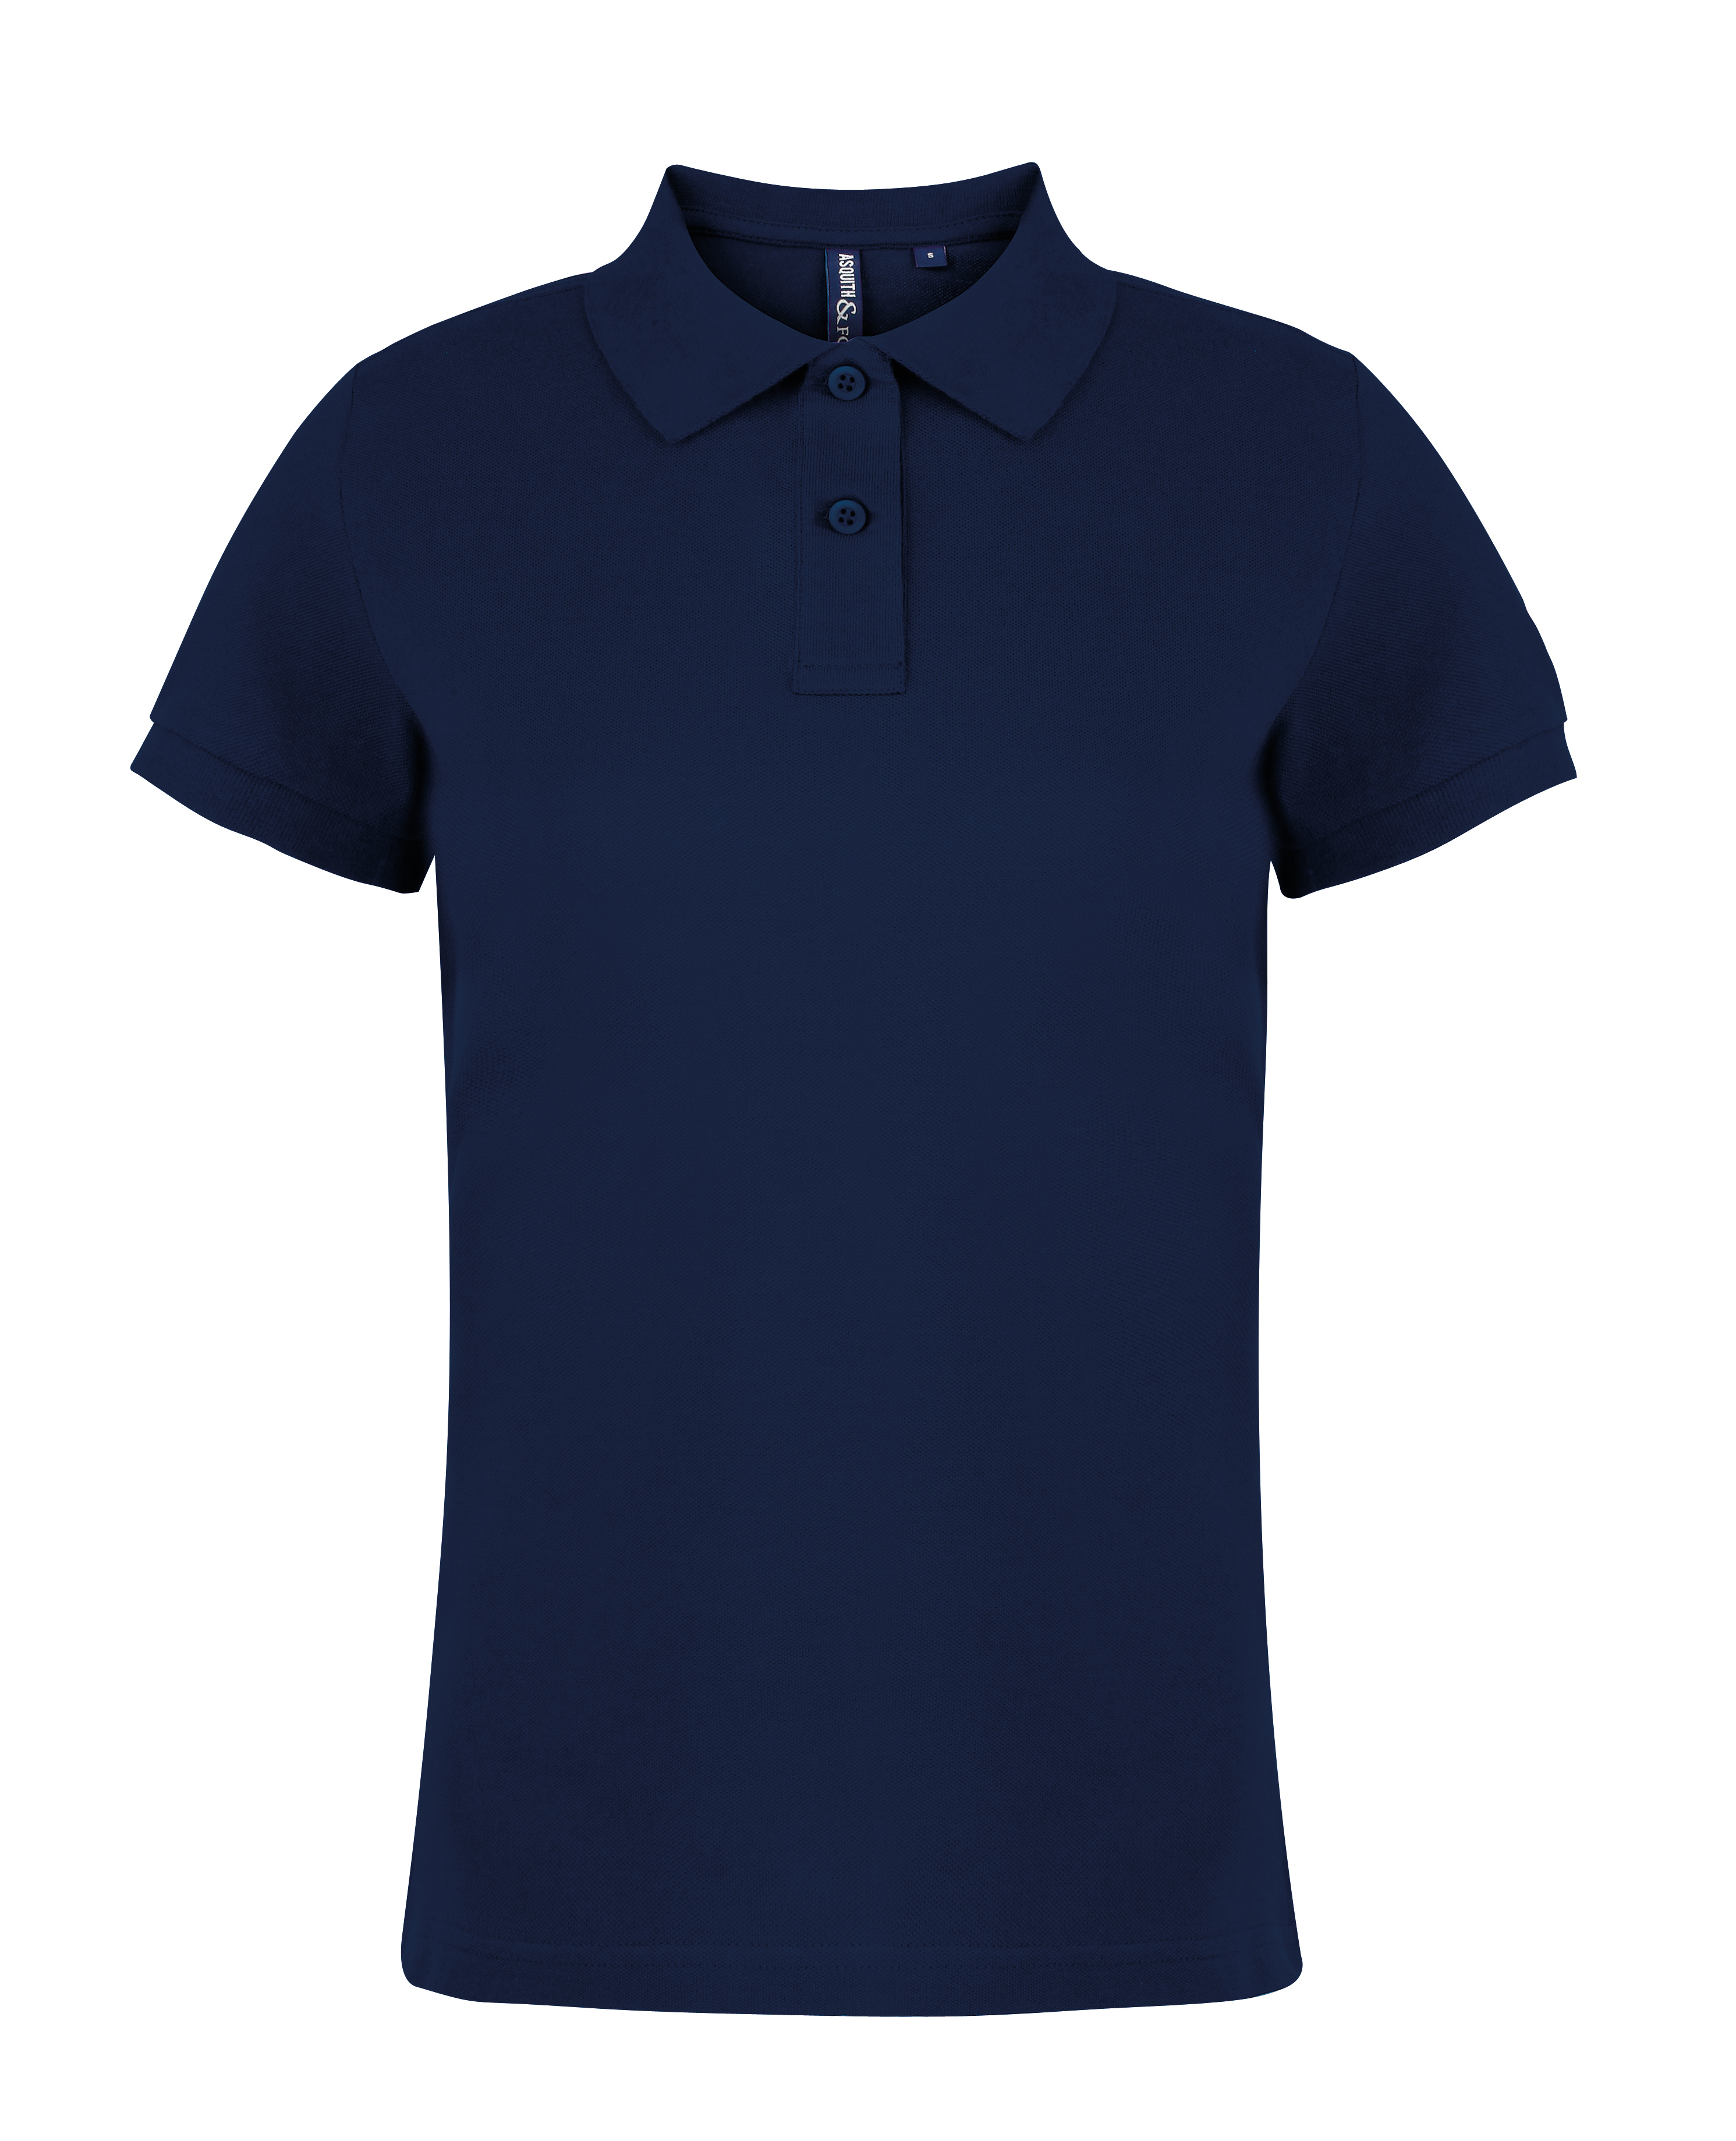 ax-httpswebsystems.s3.amazonaws.comtmp_for_downloadasquith-and-fox-womens-polo-navy.jpg